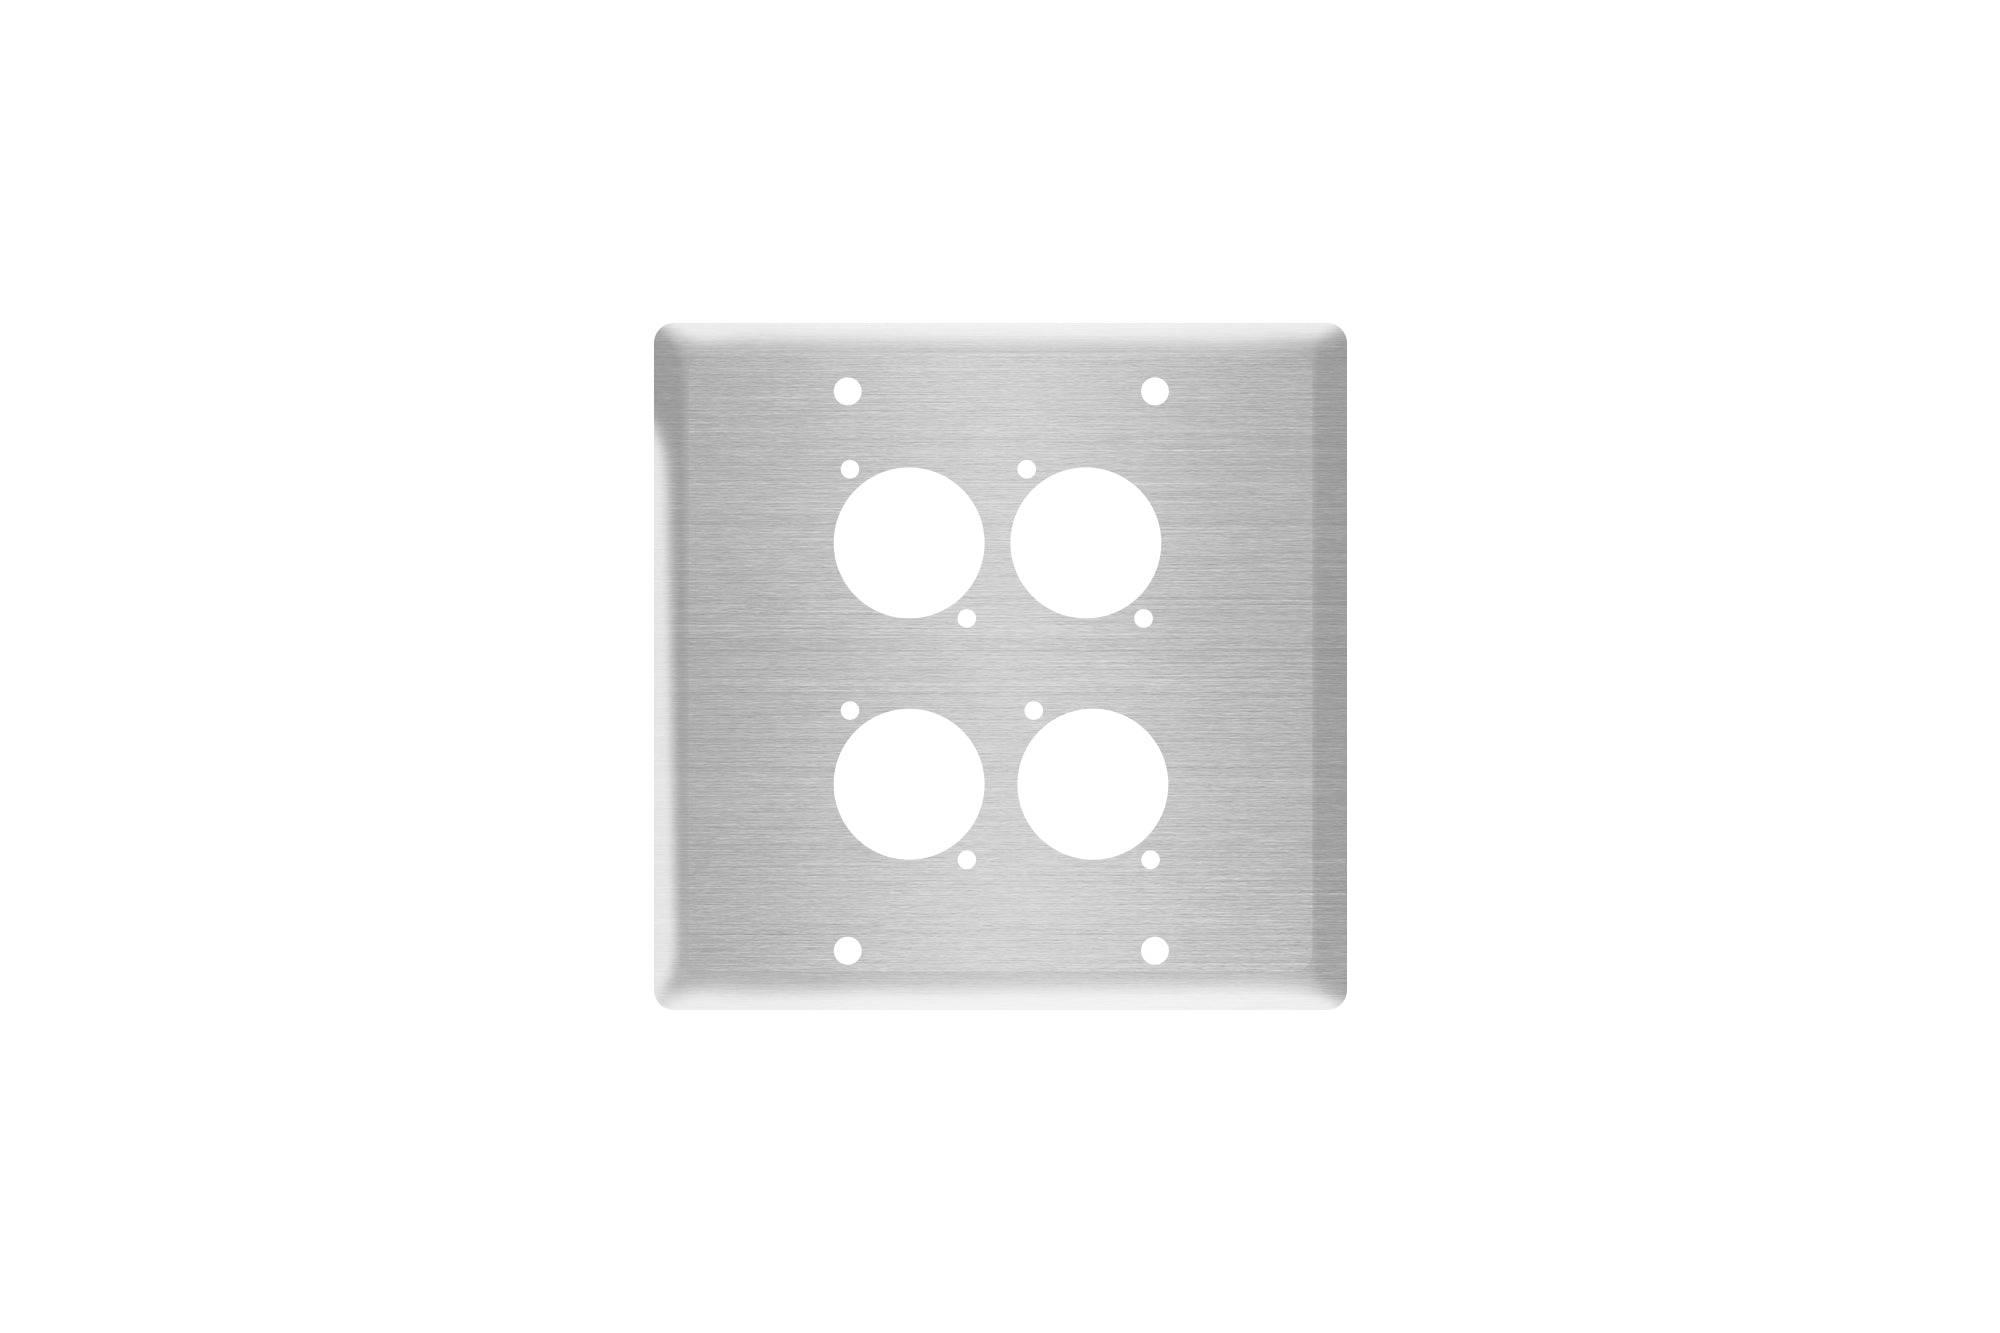 OSP Q-4-BLANK Double Gang Quad Stainless Wall Plate with 4 Series "D" Holes